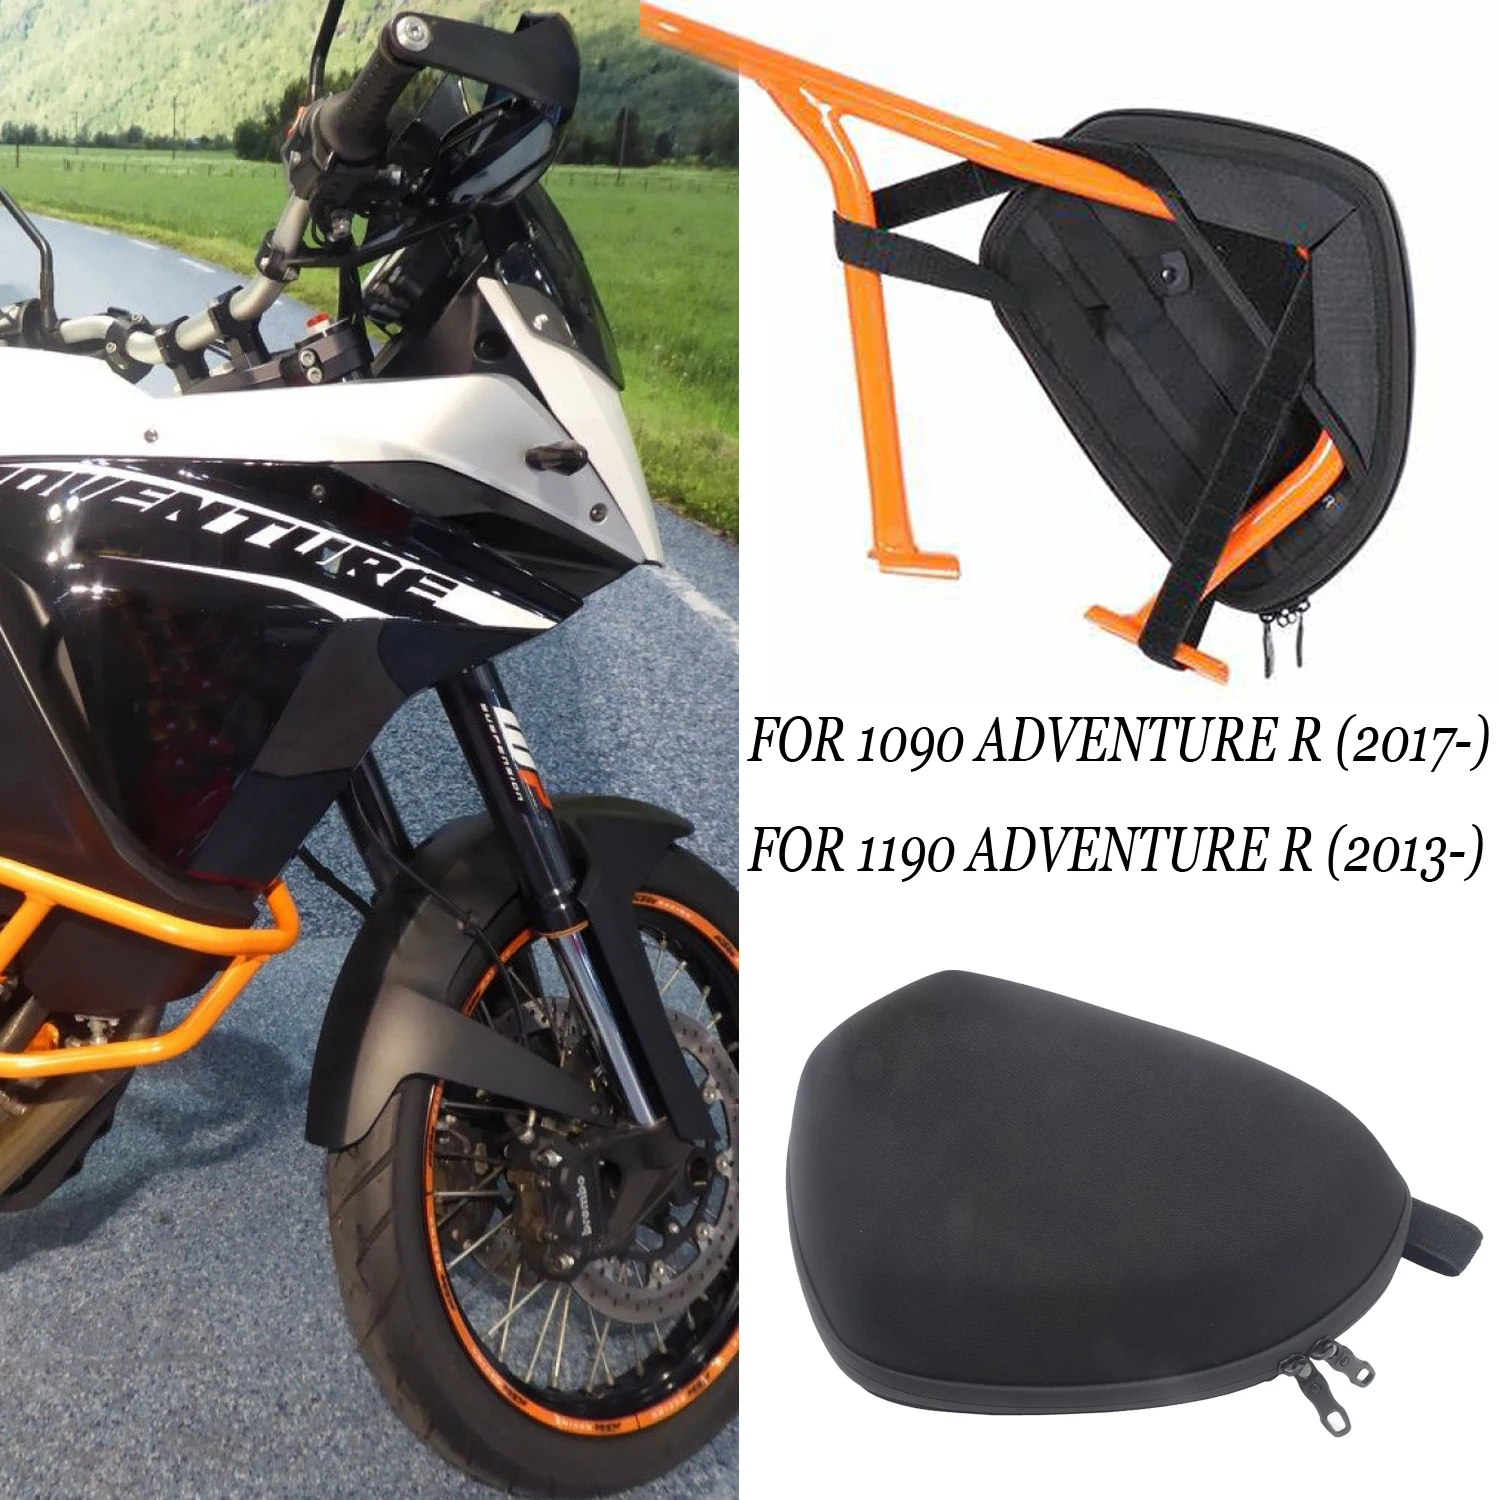 motorcycle-for-1190-adventure-r-2013-crash-bar-bags-frame-storage-package-for-1090-adventure-r-2017-2018-2019-2020-2021